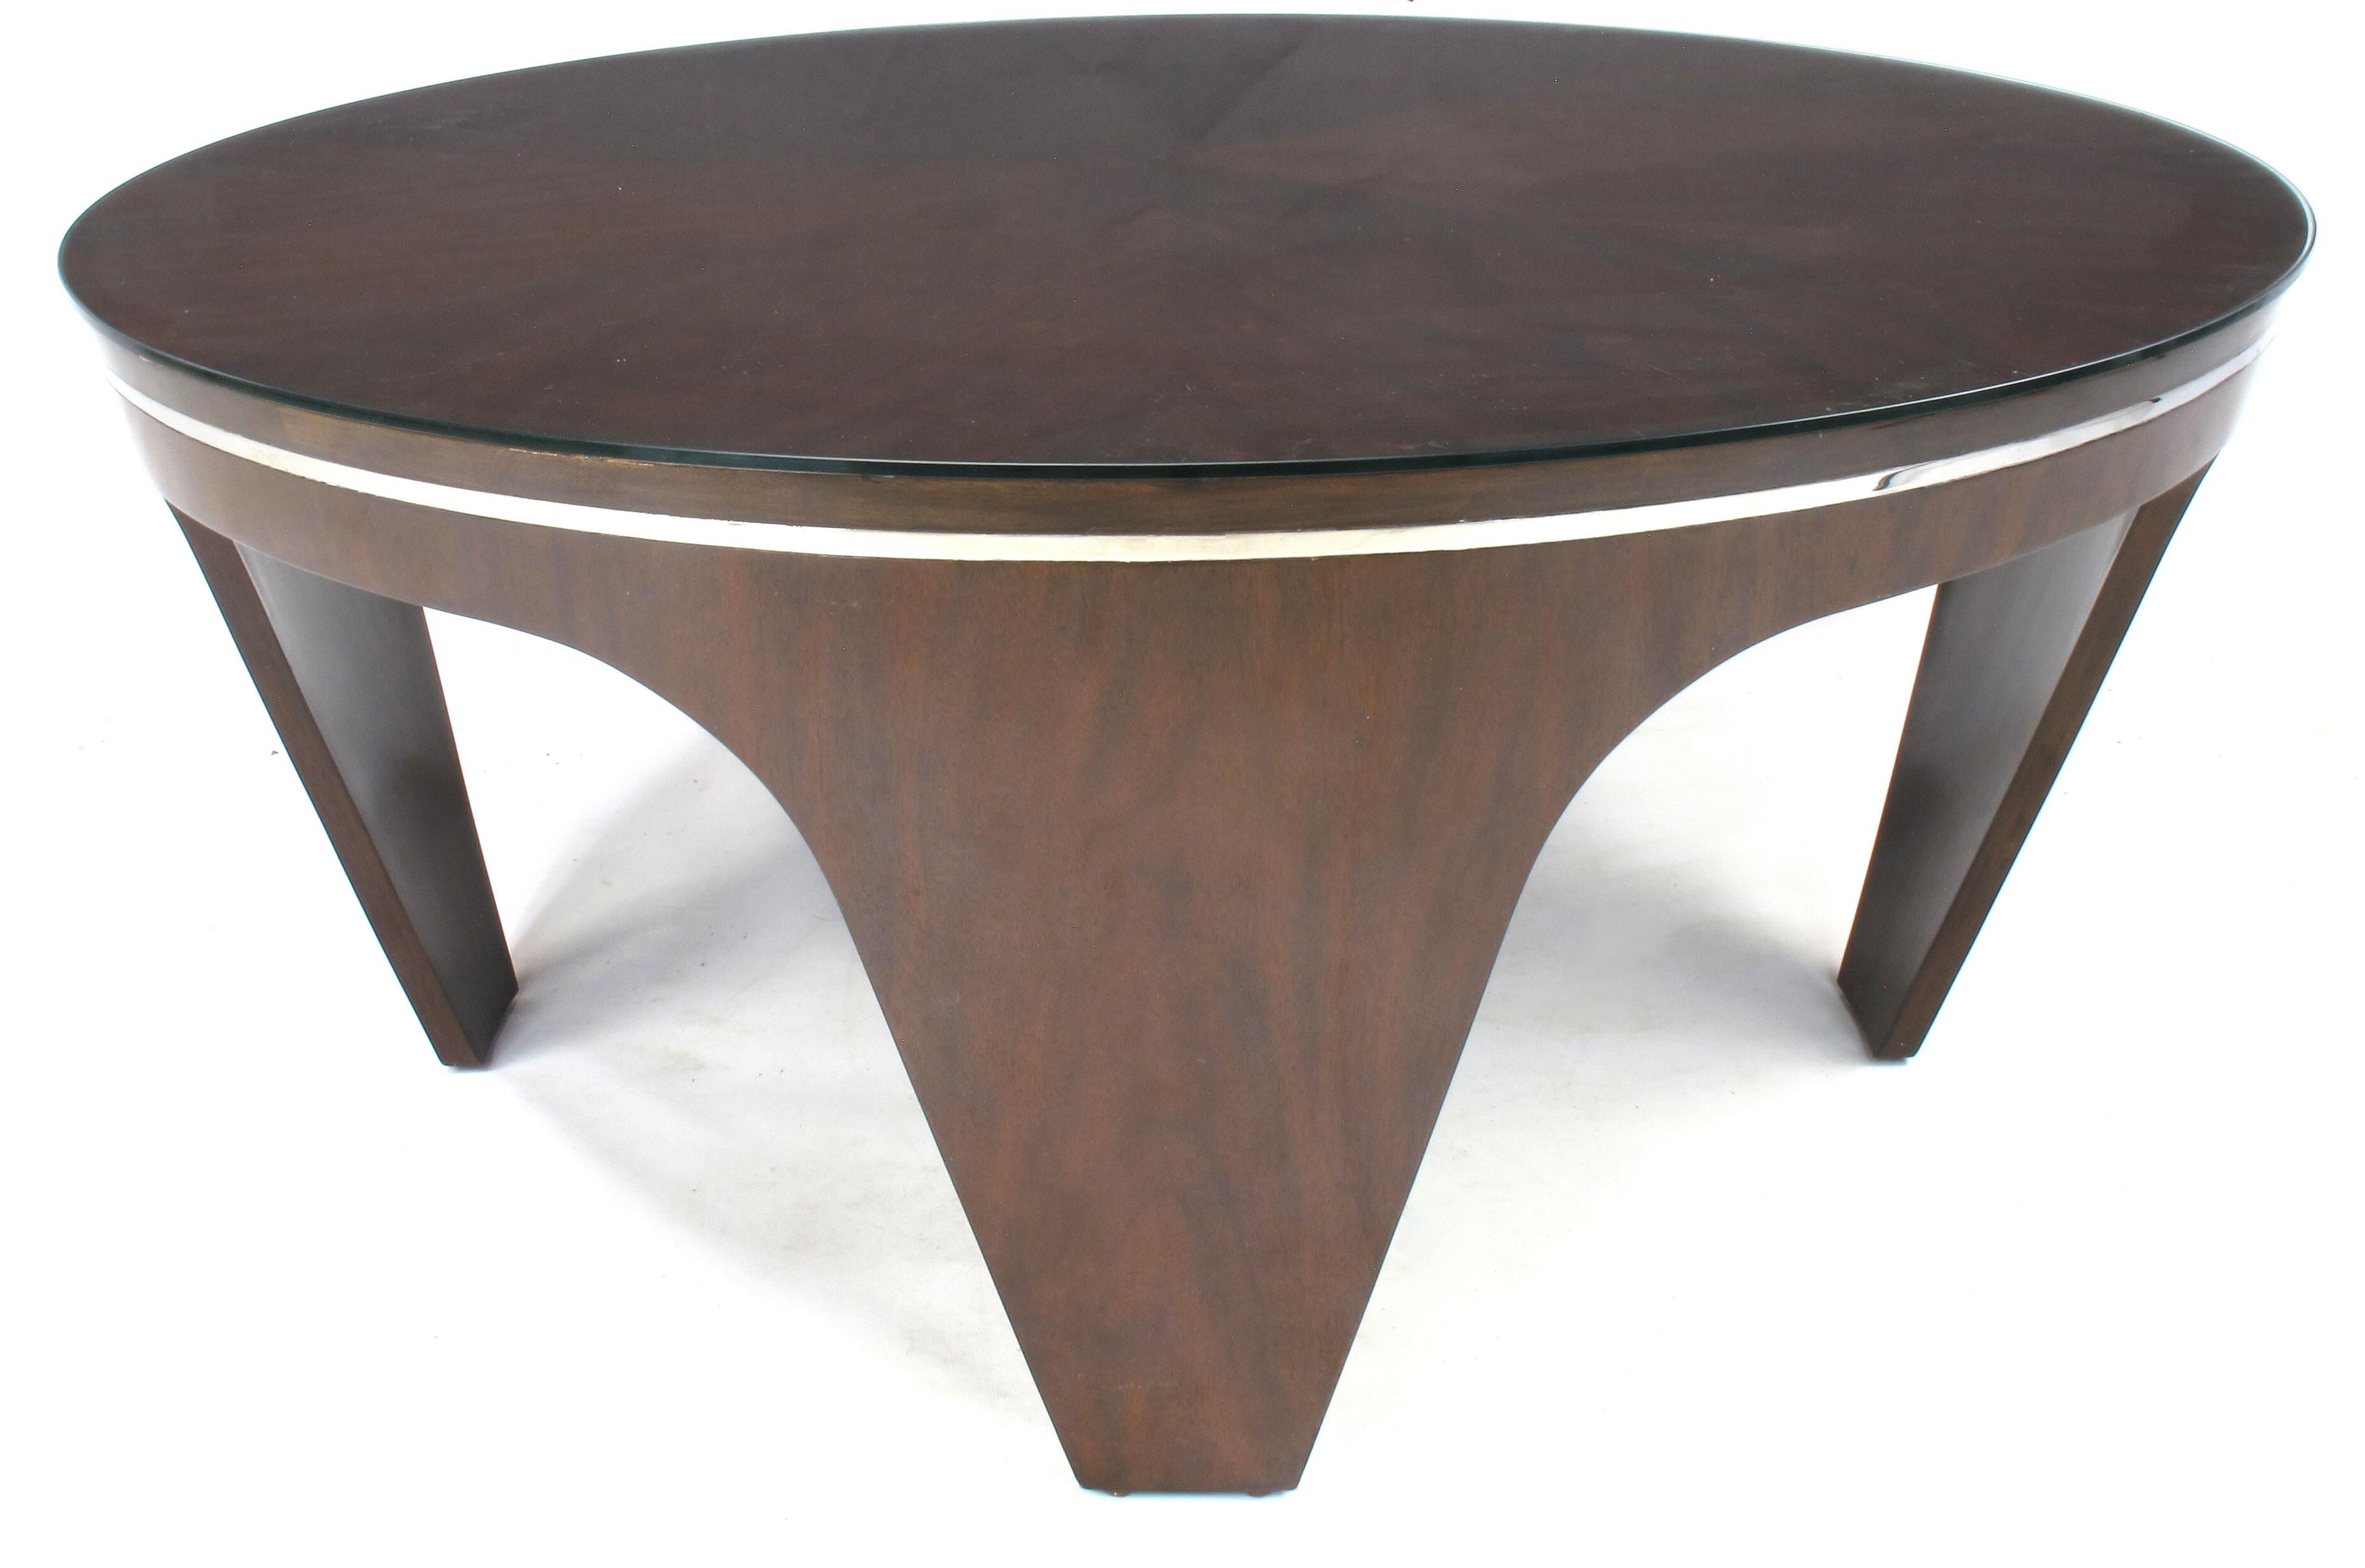 Italian Art Deco Revival Round Mahogany Coffee Table with Parquetry Top 4